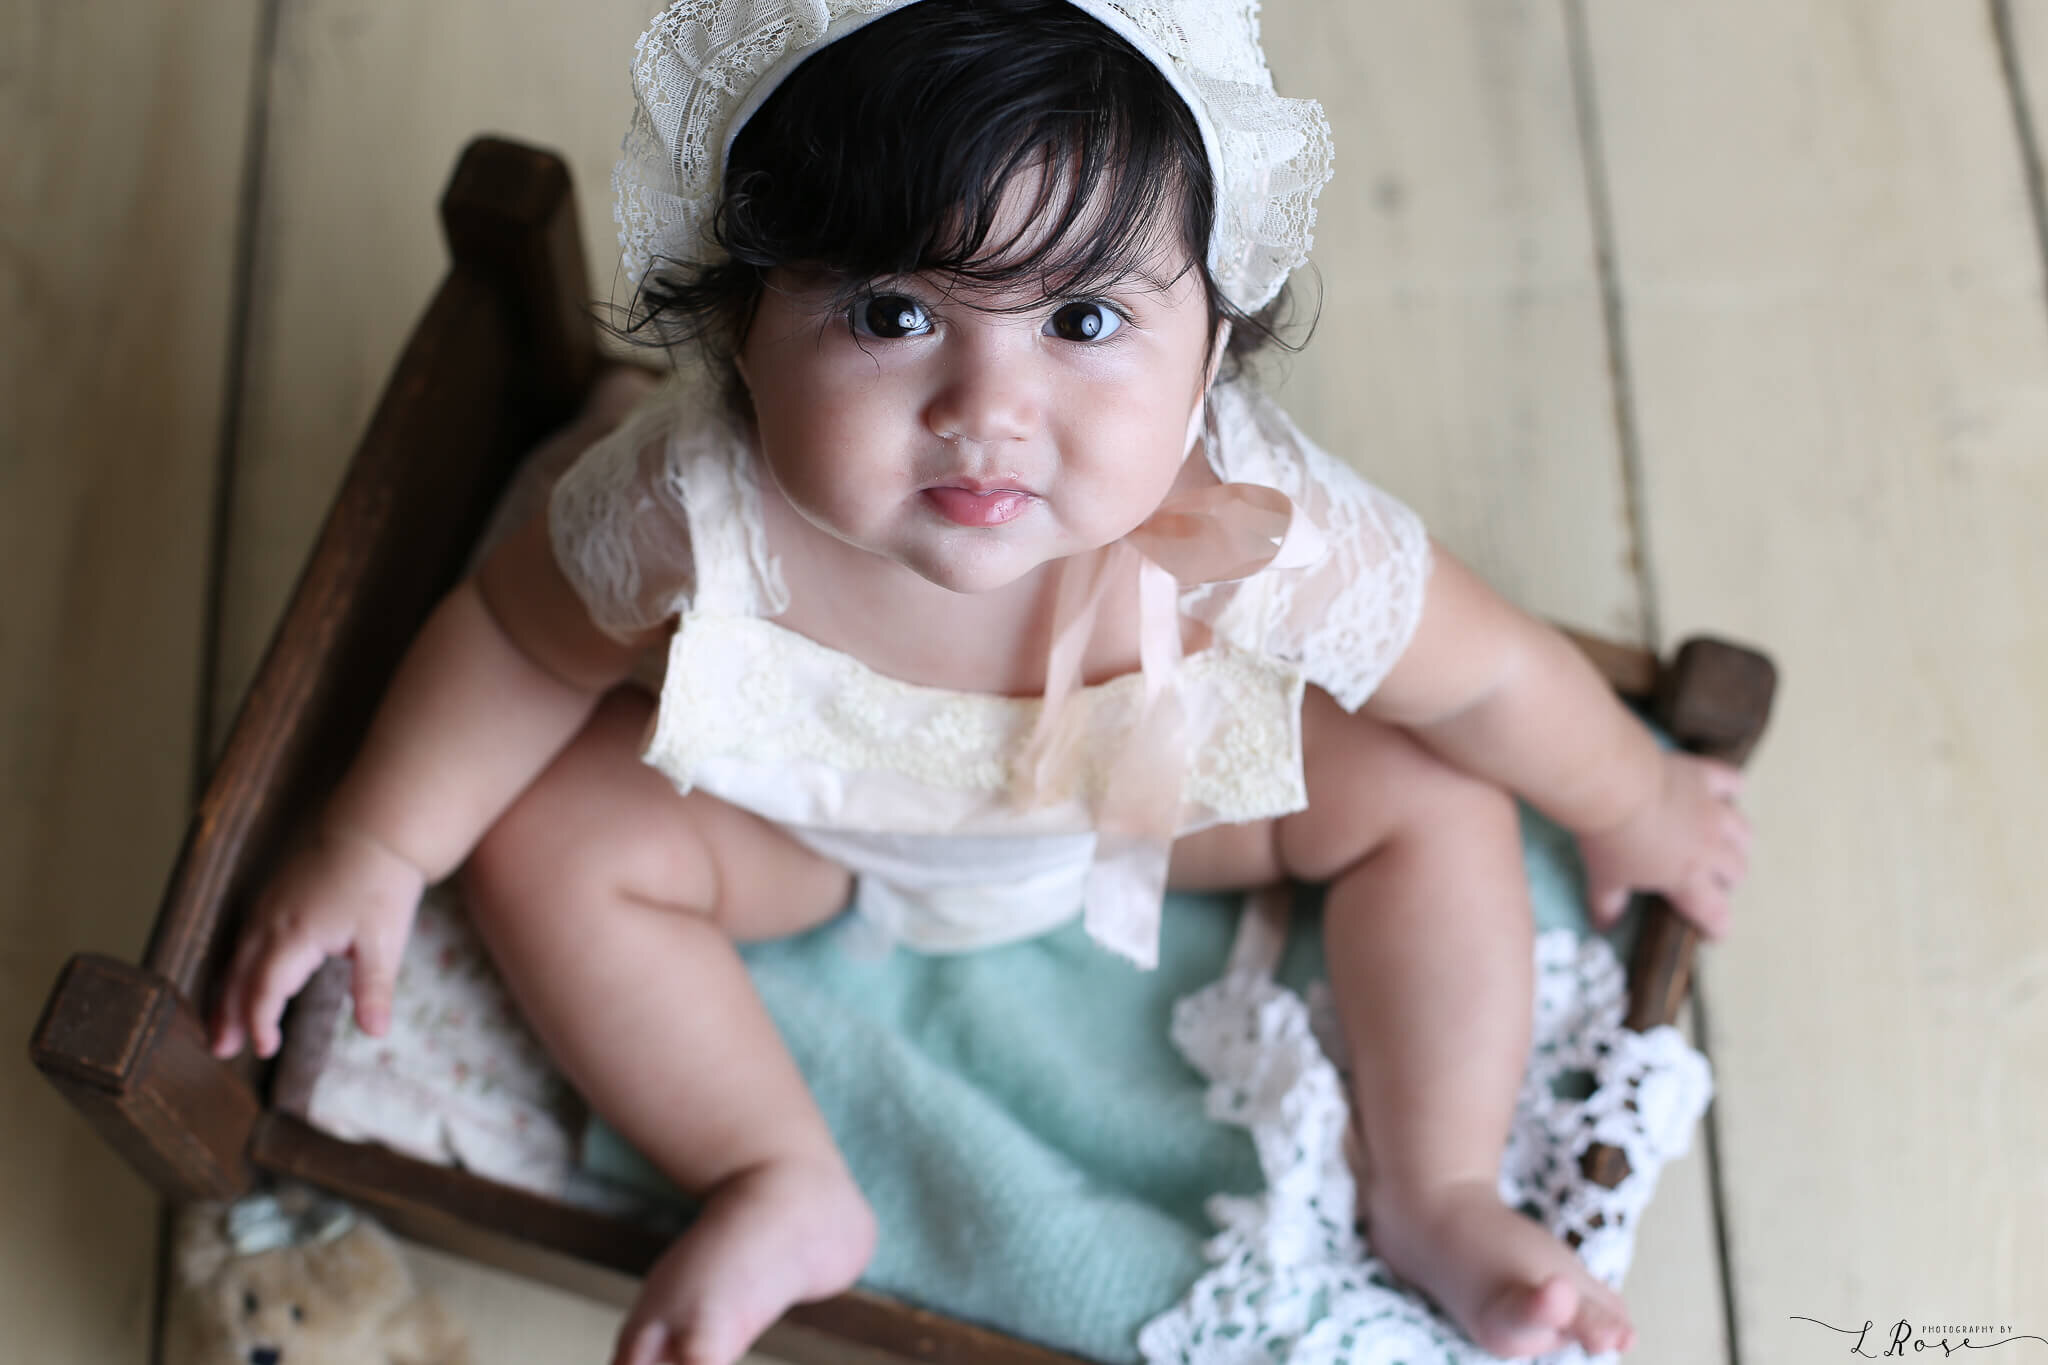  A photograph from above of a cute baby girl wearing a lacy bonnet and playsuit, sitting in a small cradle as she looks up at the camera, marking a milestone by Photography by L Rose, a baby photographer in San Diego California 